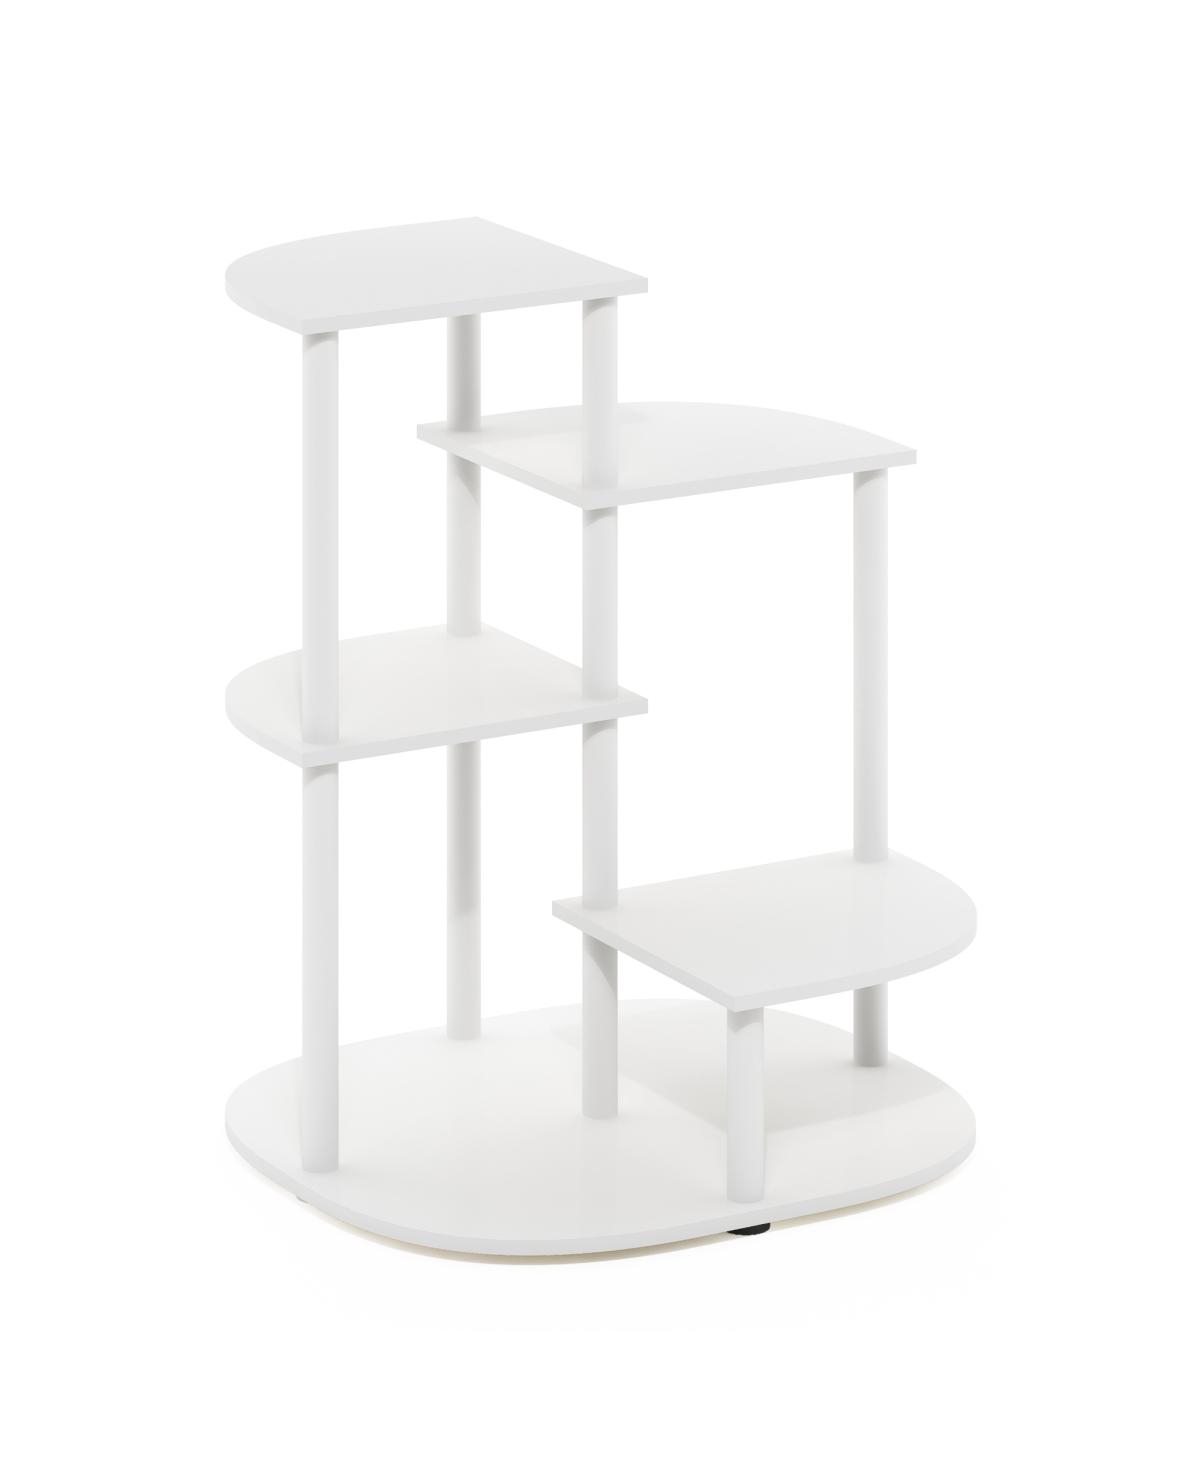 Celuka 4-Tier Indoor Outdoor Potted Plant Stand Holder for Multiple Plants, White & Virgin White - White